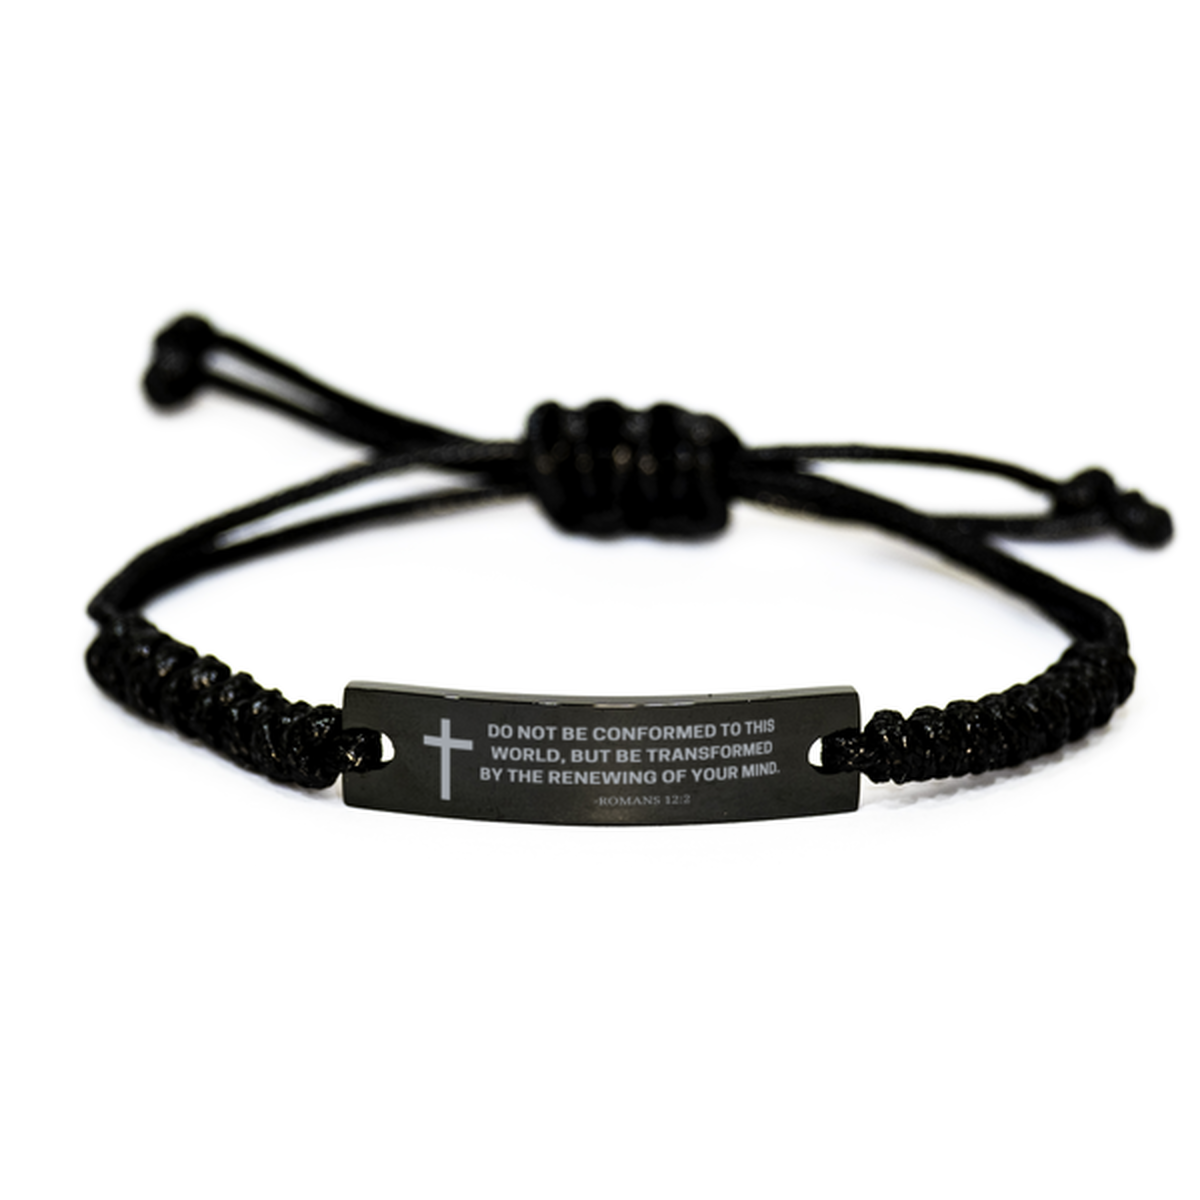 Baptism Gifts For Teenage Boys Girls, Christian Bible Verse Black Rope Bracelet, Do not be conformed to this world, Catholic Confirmation Gifts for Son, Godson, Grandson, Nephew